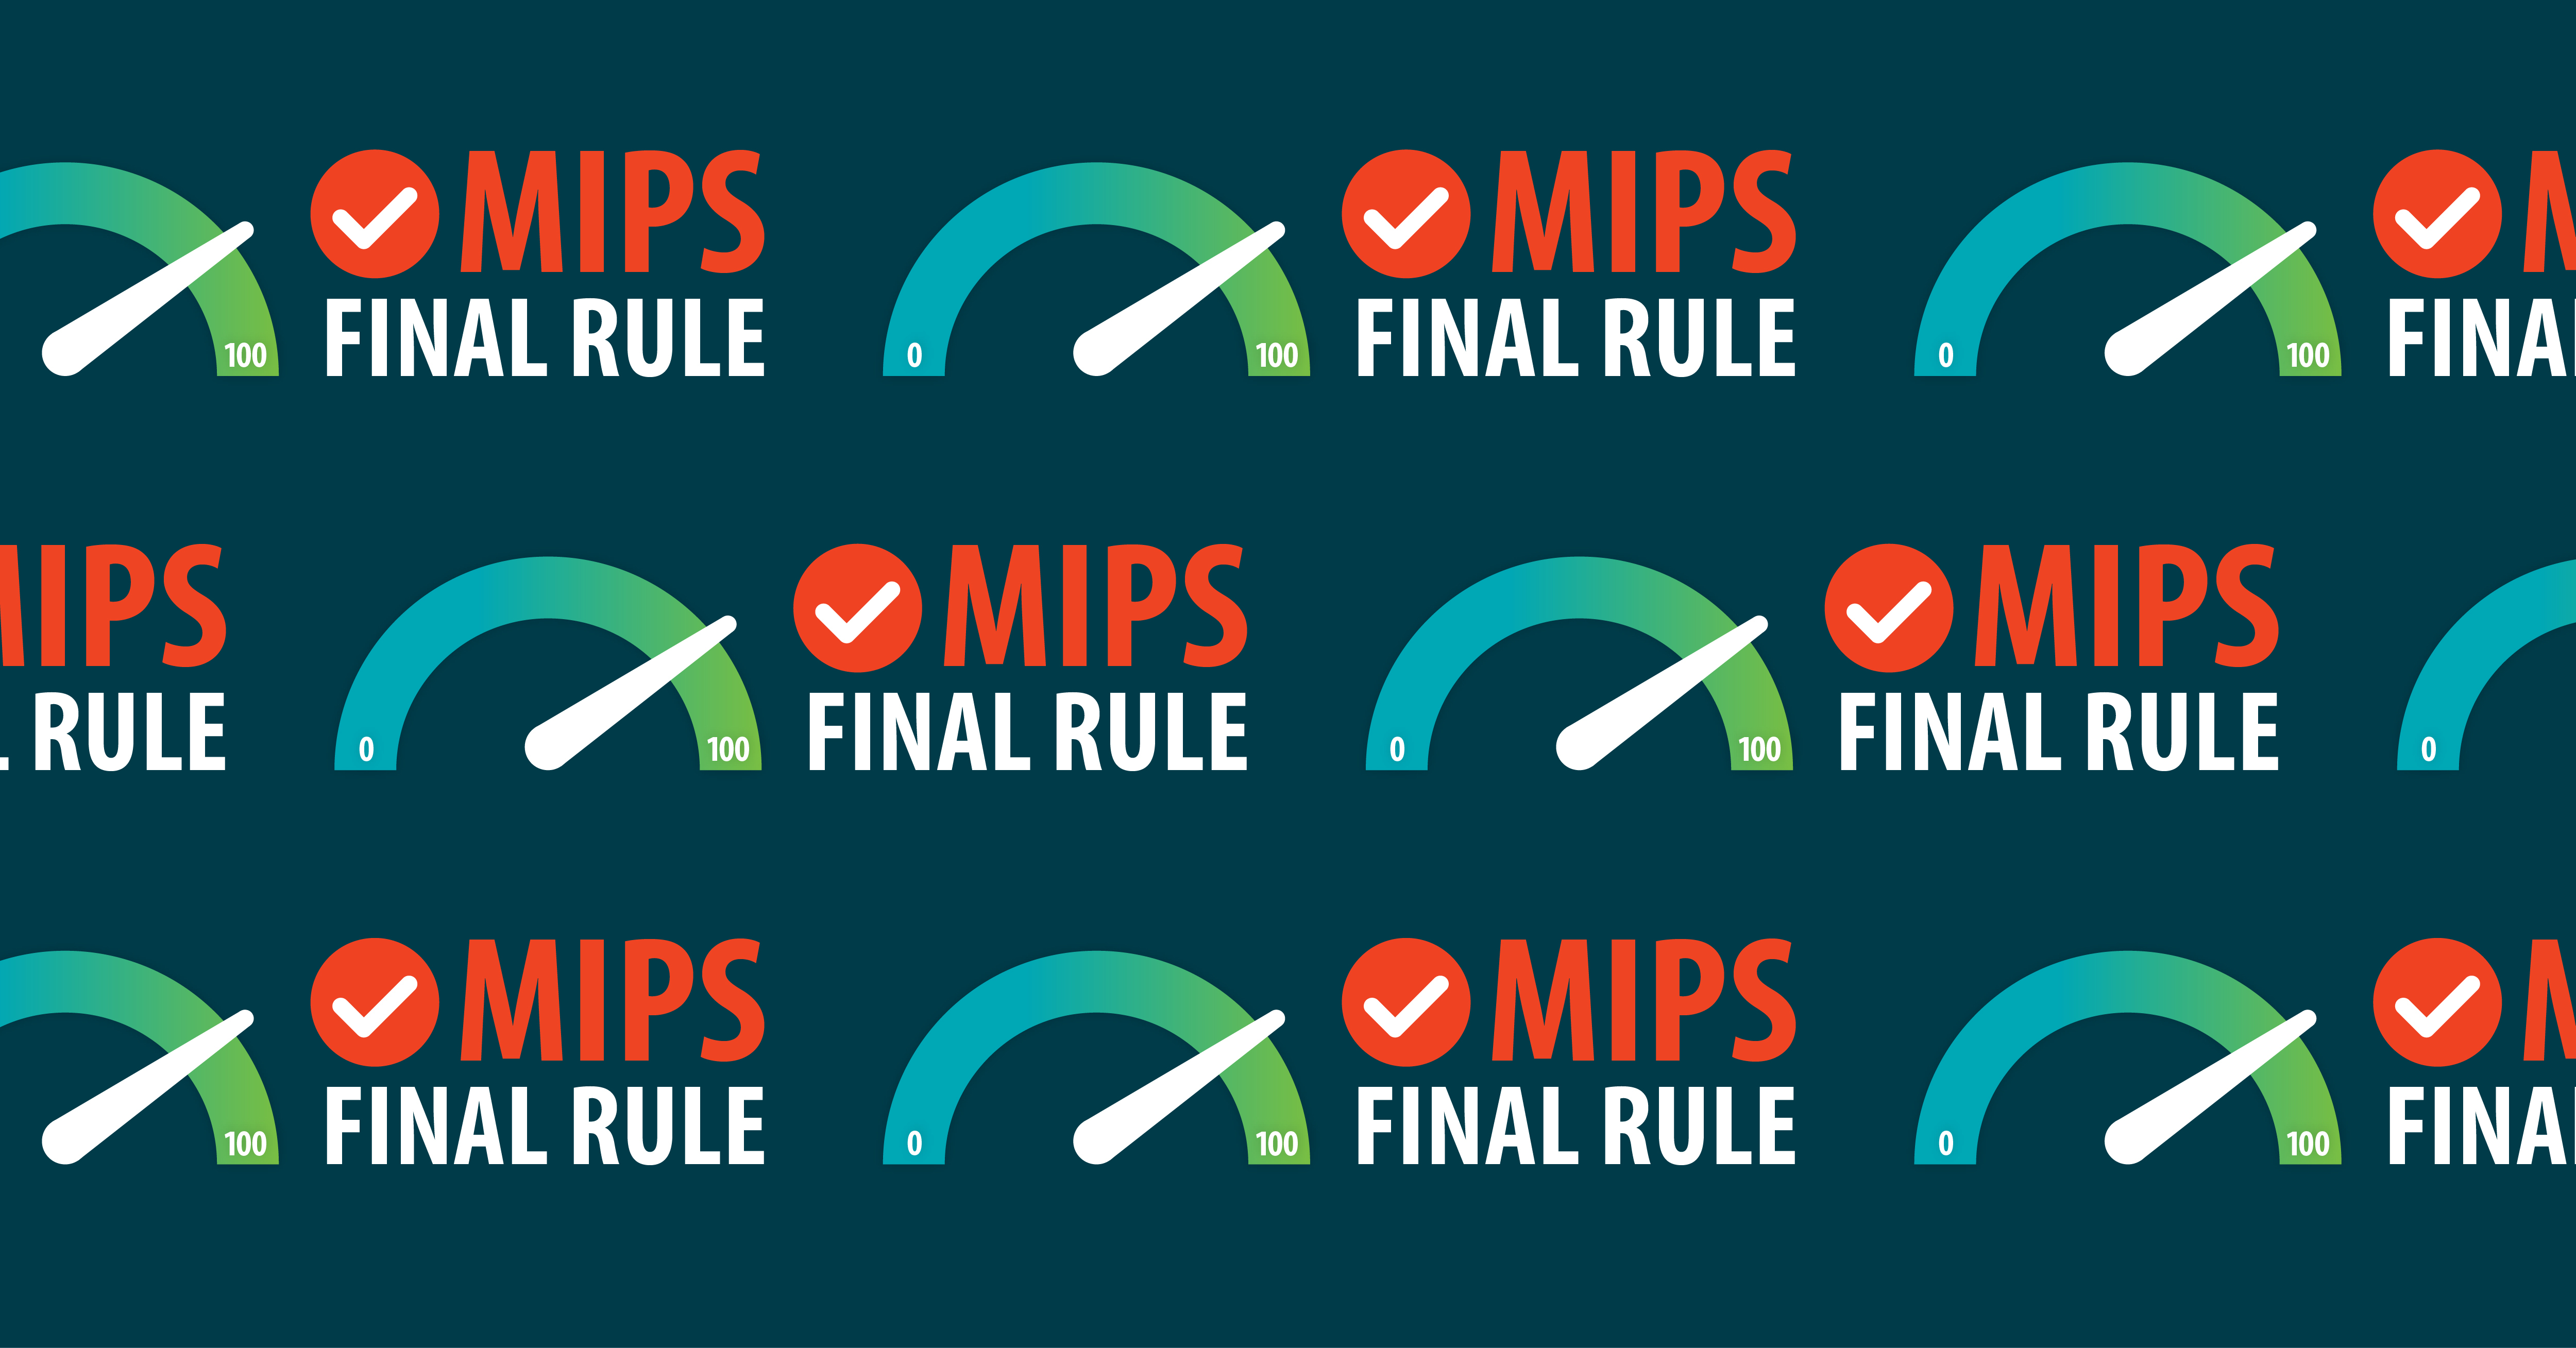 How the MIPS Final Rule Changes Will Impact Practices in 2023